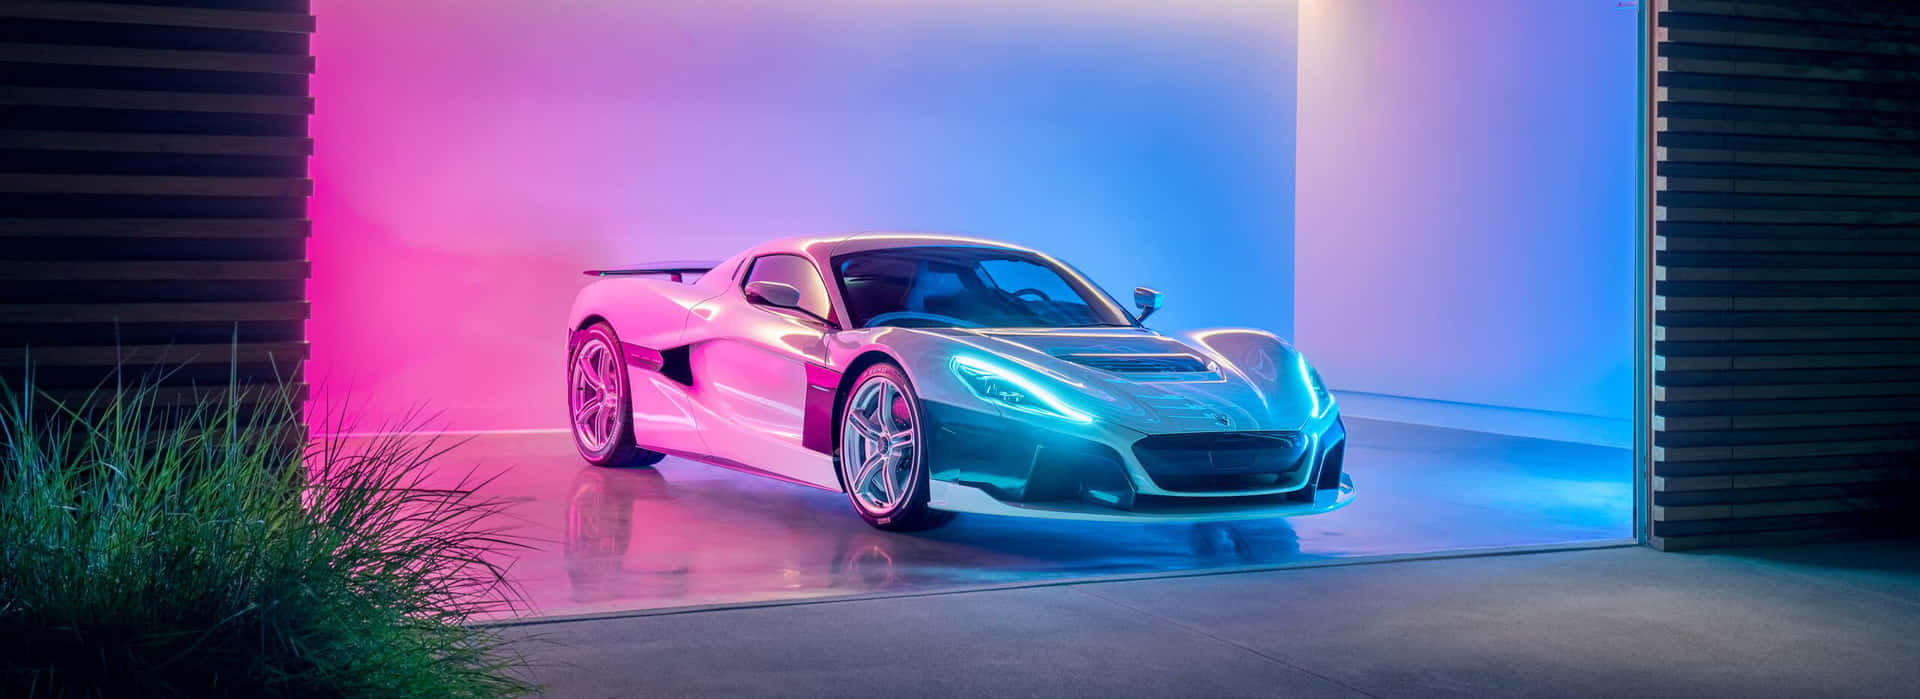 Rimac Automobili - Pioneers in Electric Supercars Wallpaper